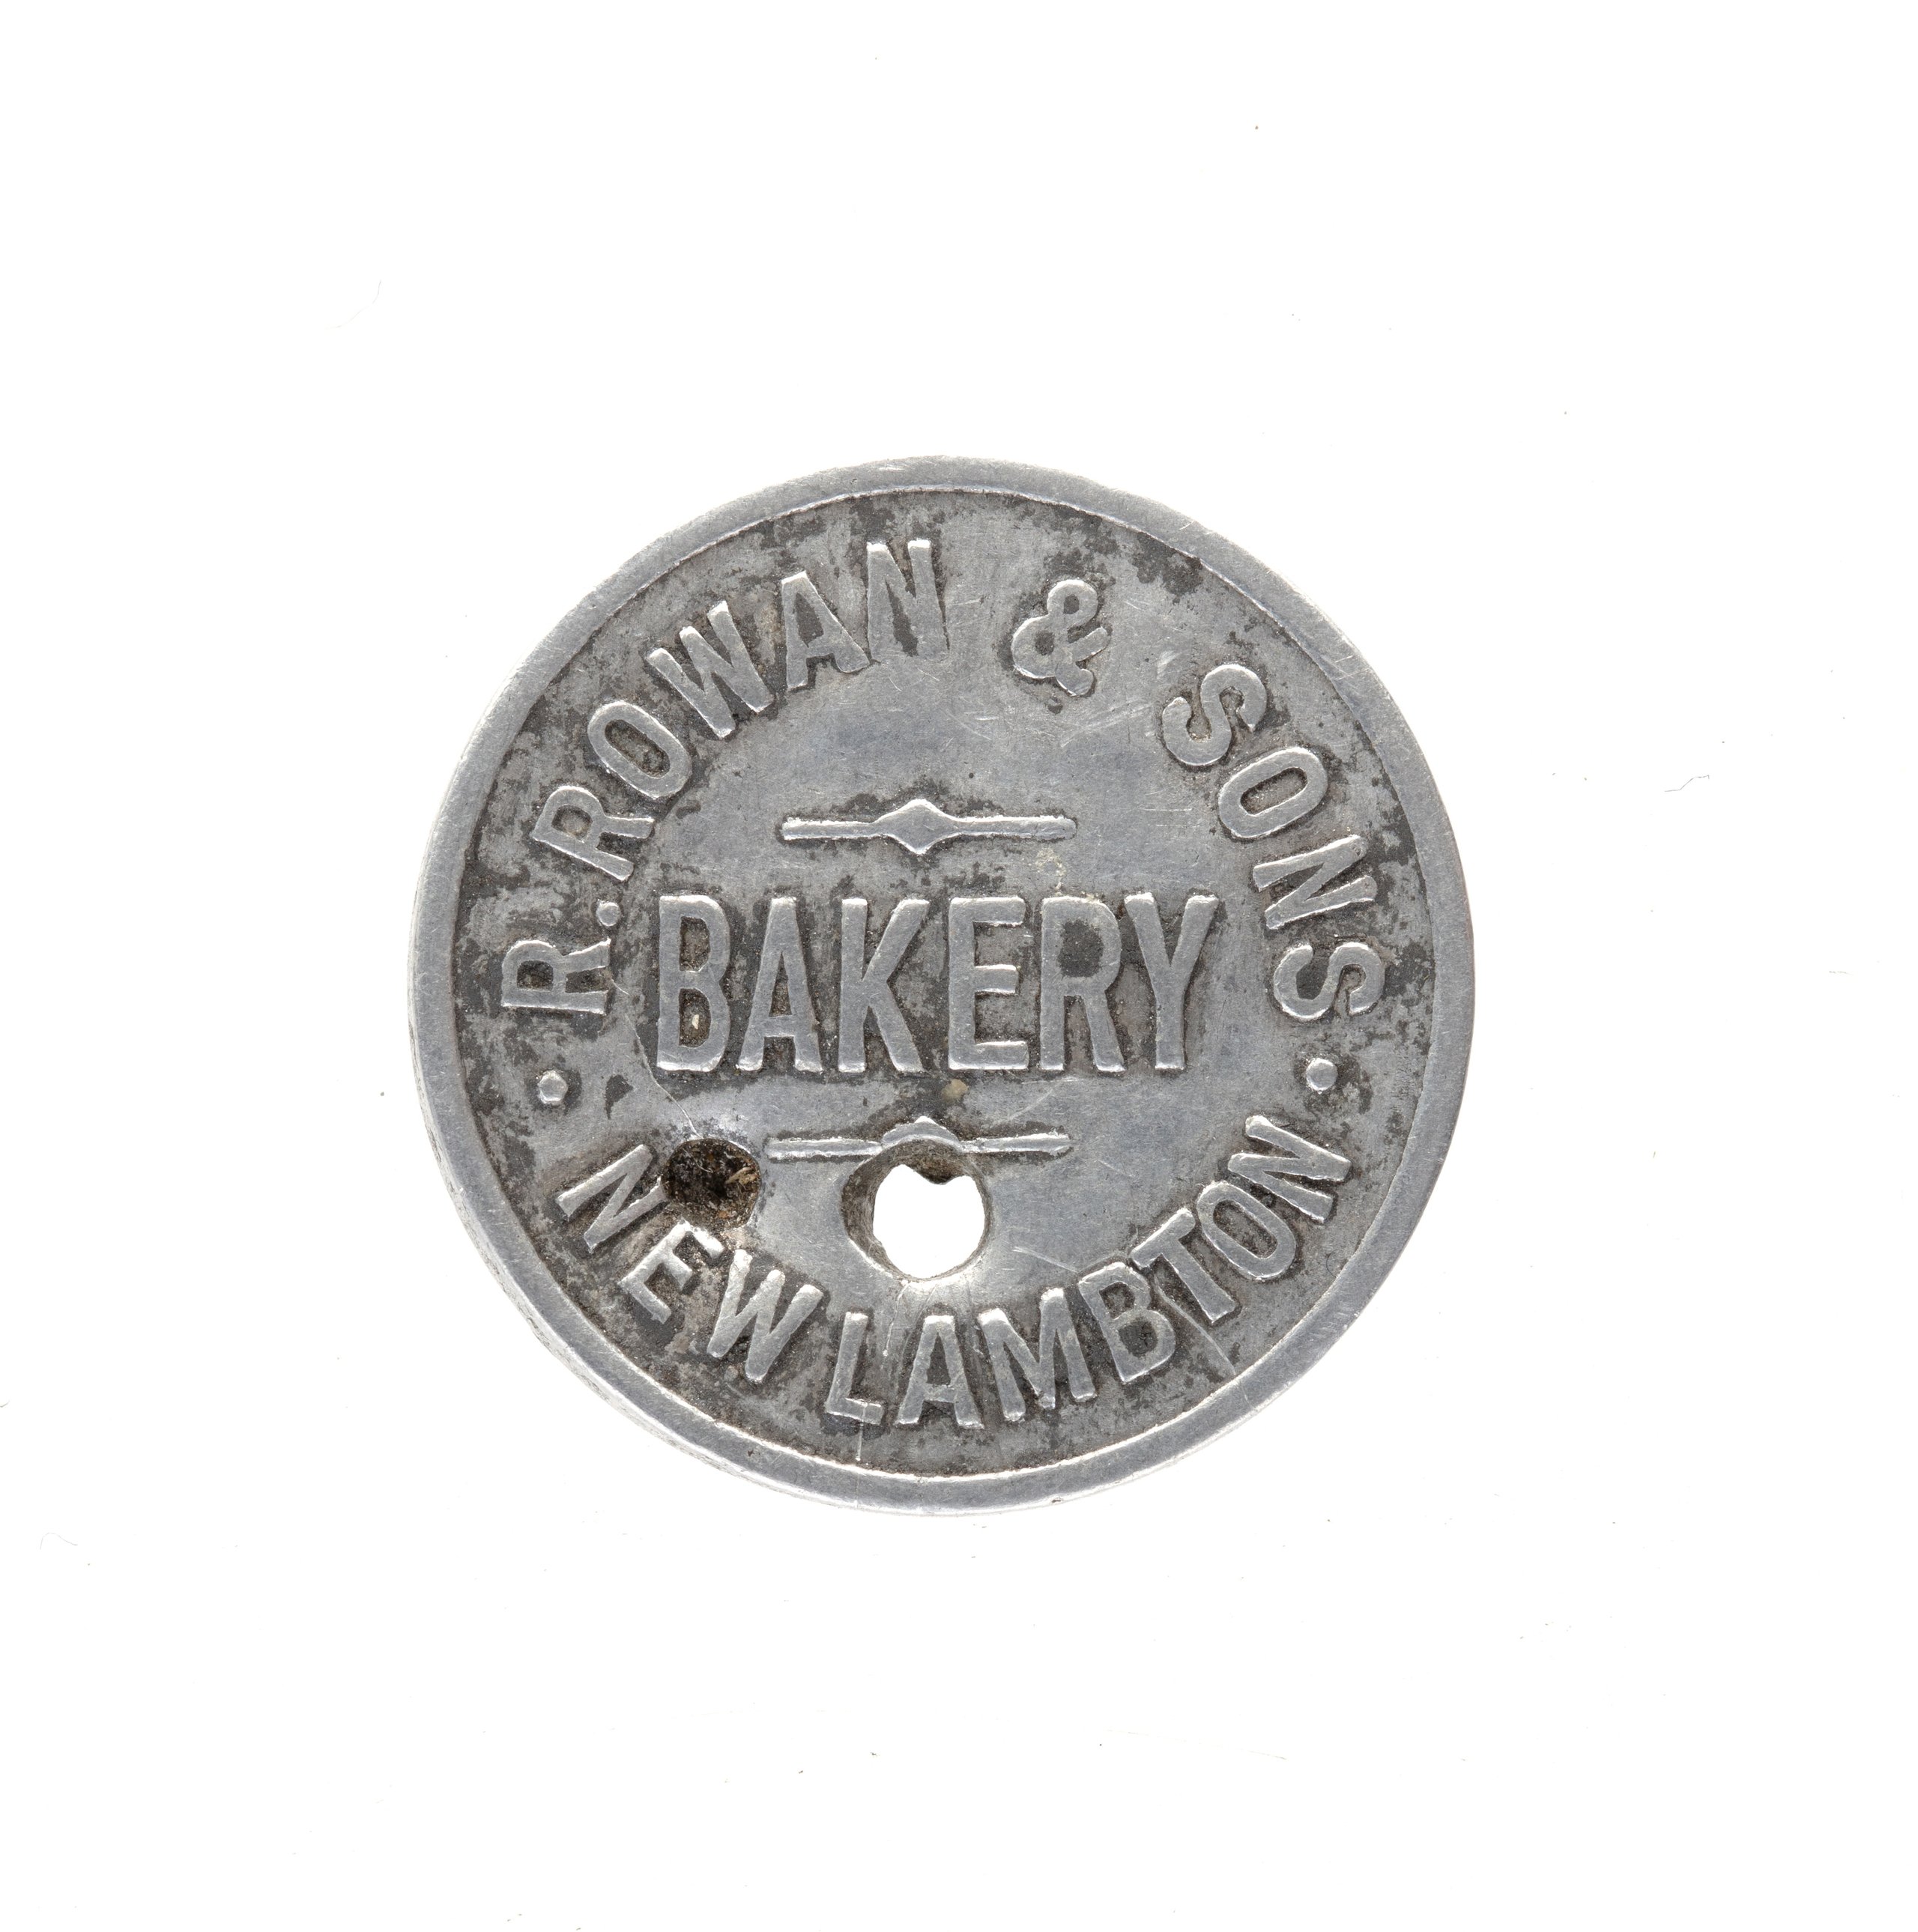 Trade token issued by R Rowan & Sons